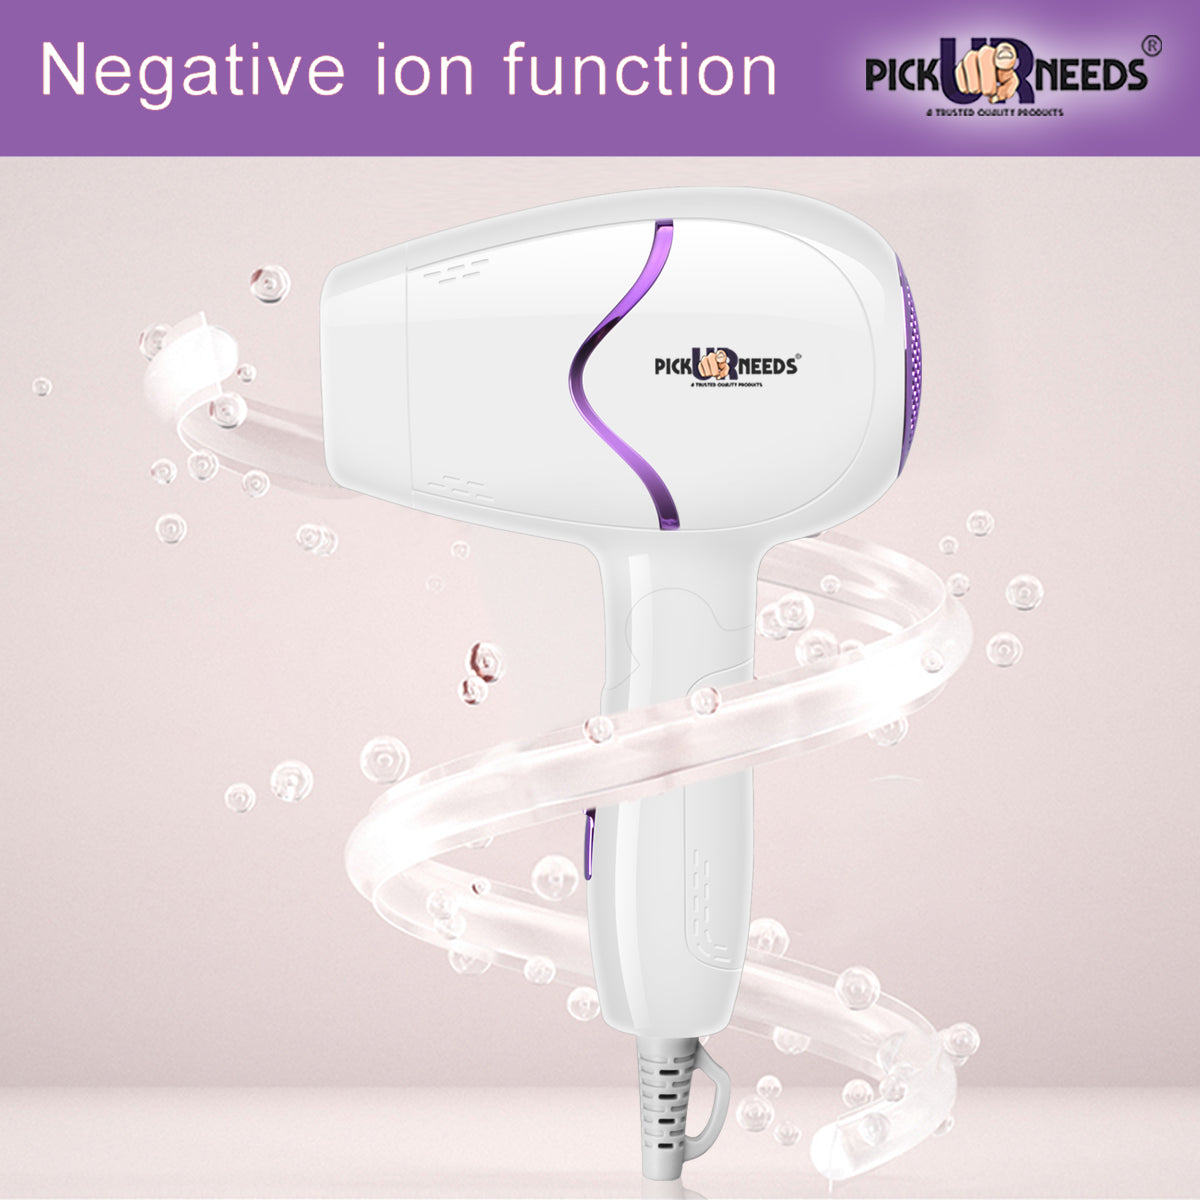 Pick Ur Needs 3500W Compact & Portable Mini Professional Portable Hair Dryer with Foldable Handle